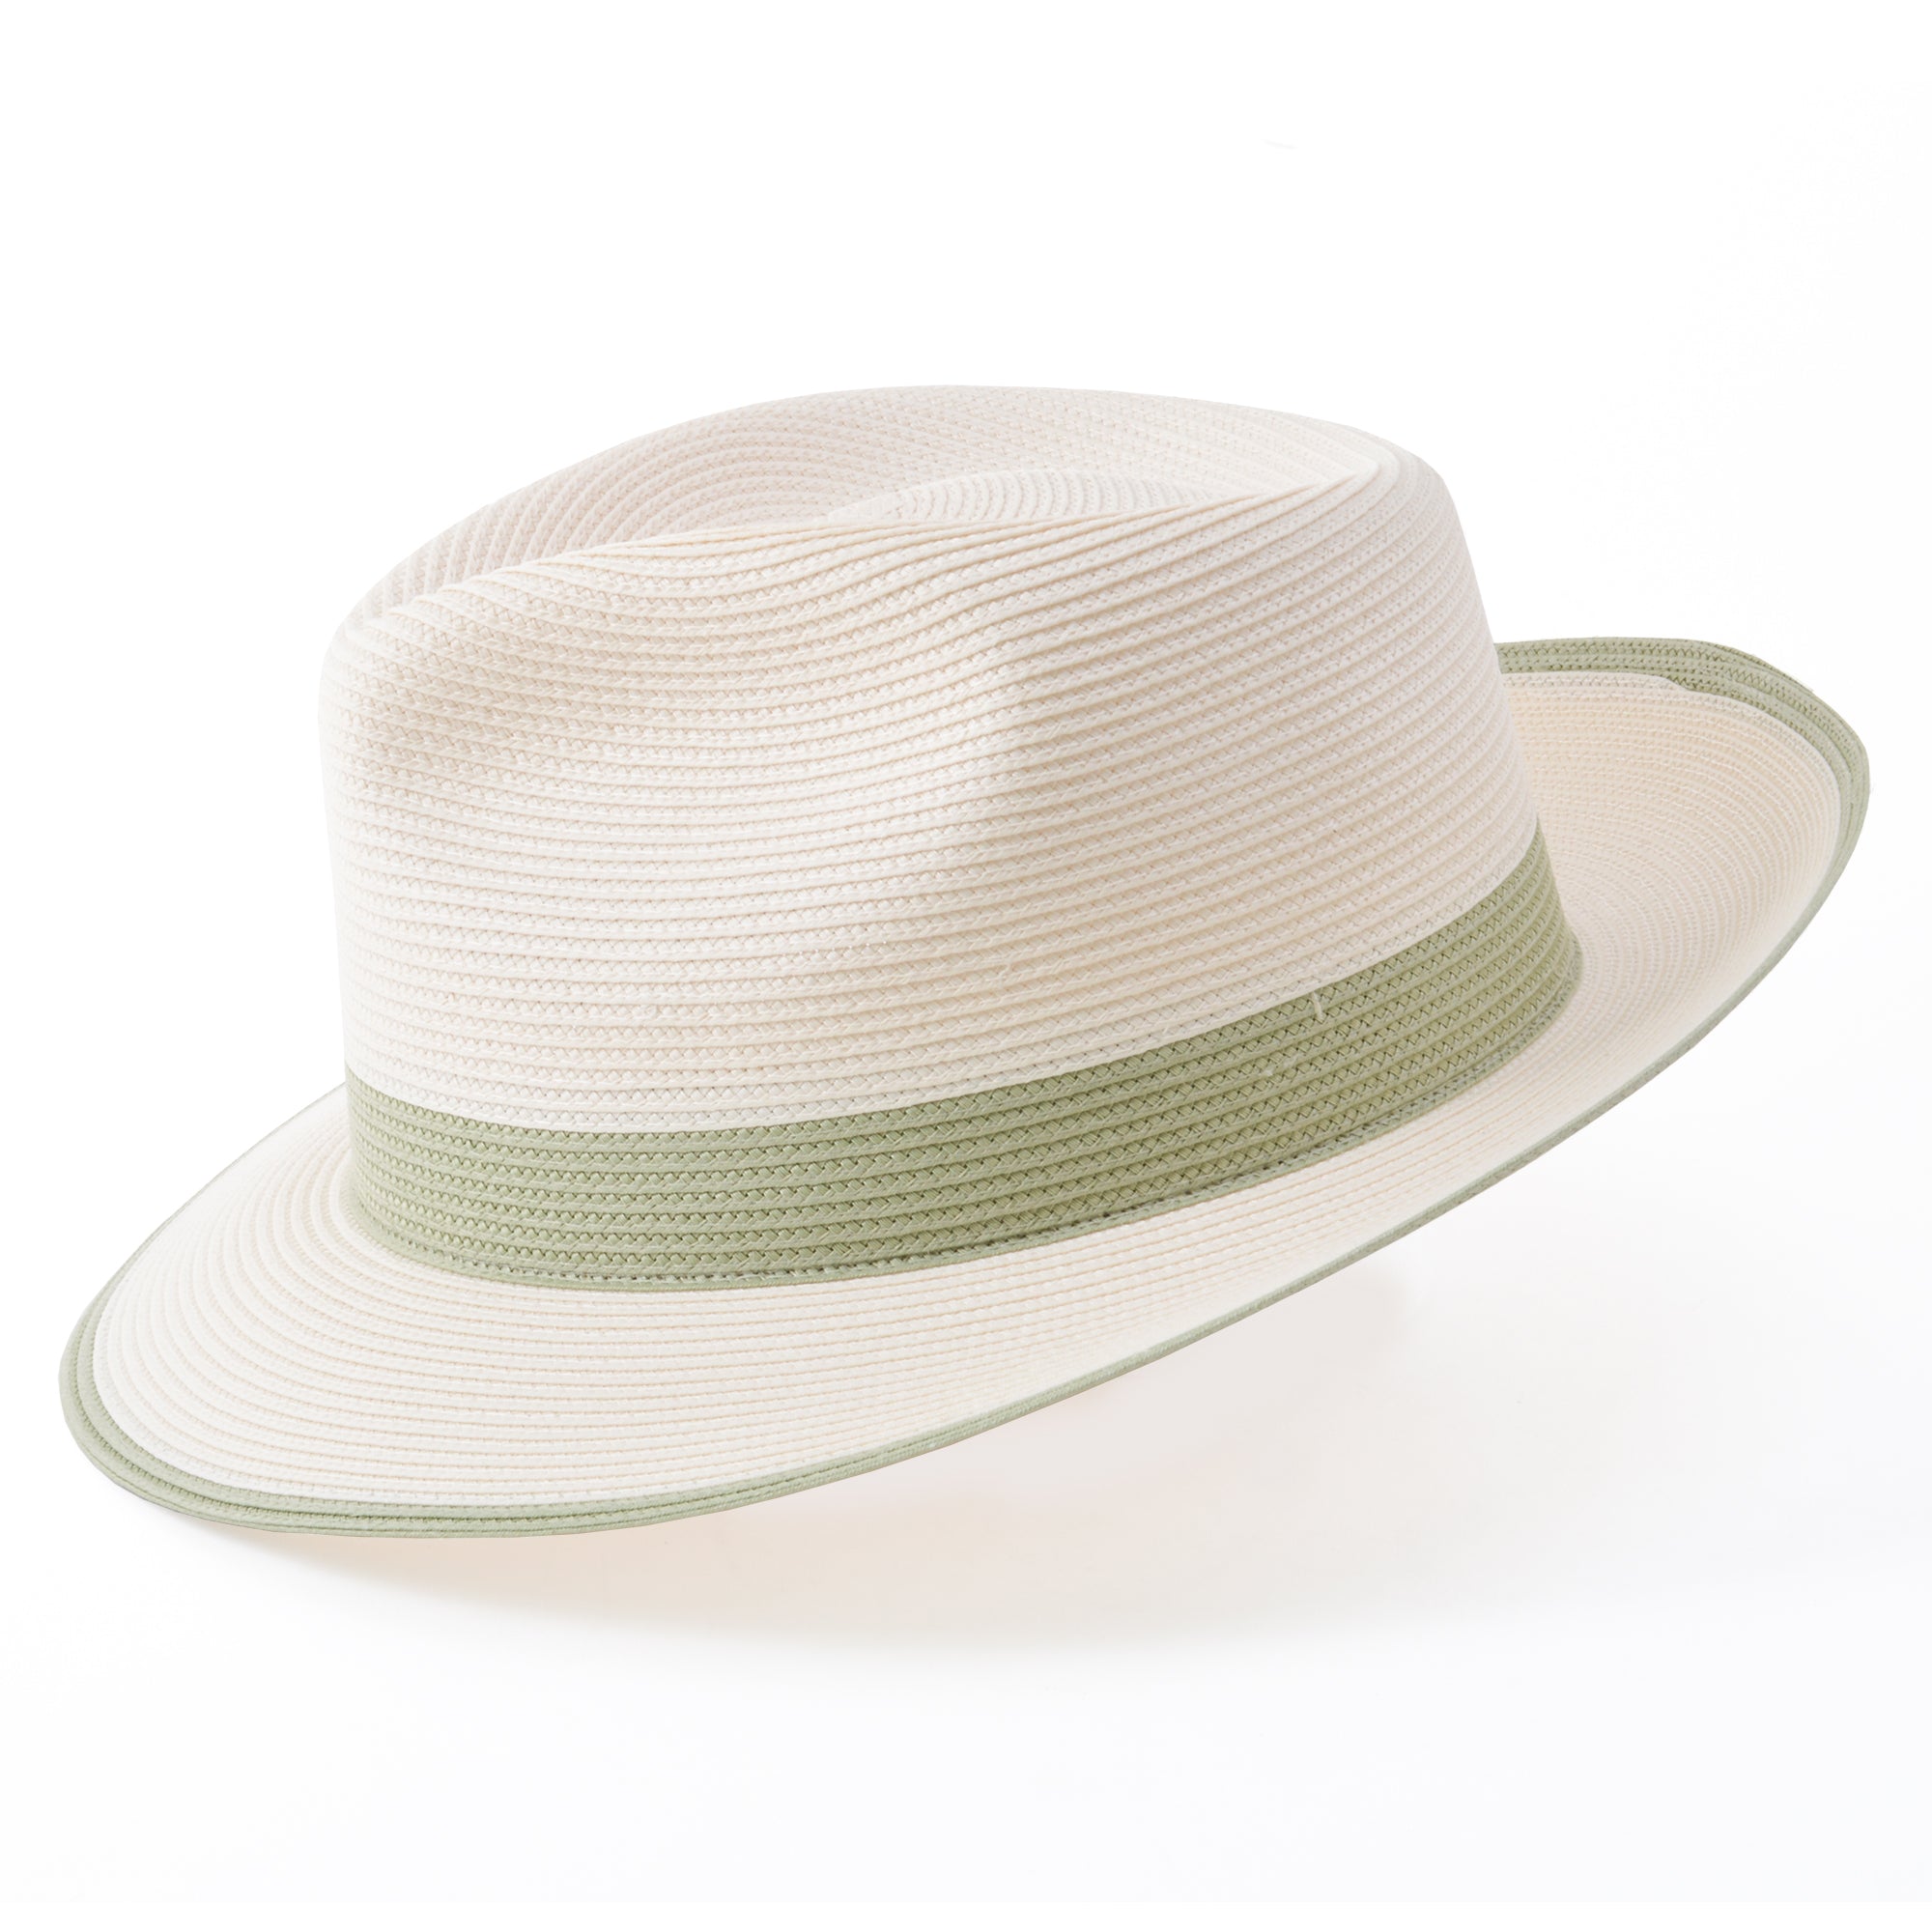 Dobbs Thumbs Up Milan Straw Hat in Ivory/Olive